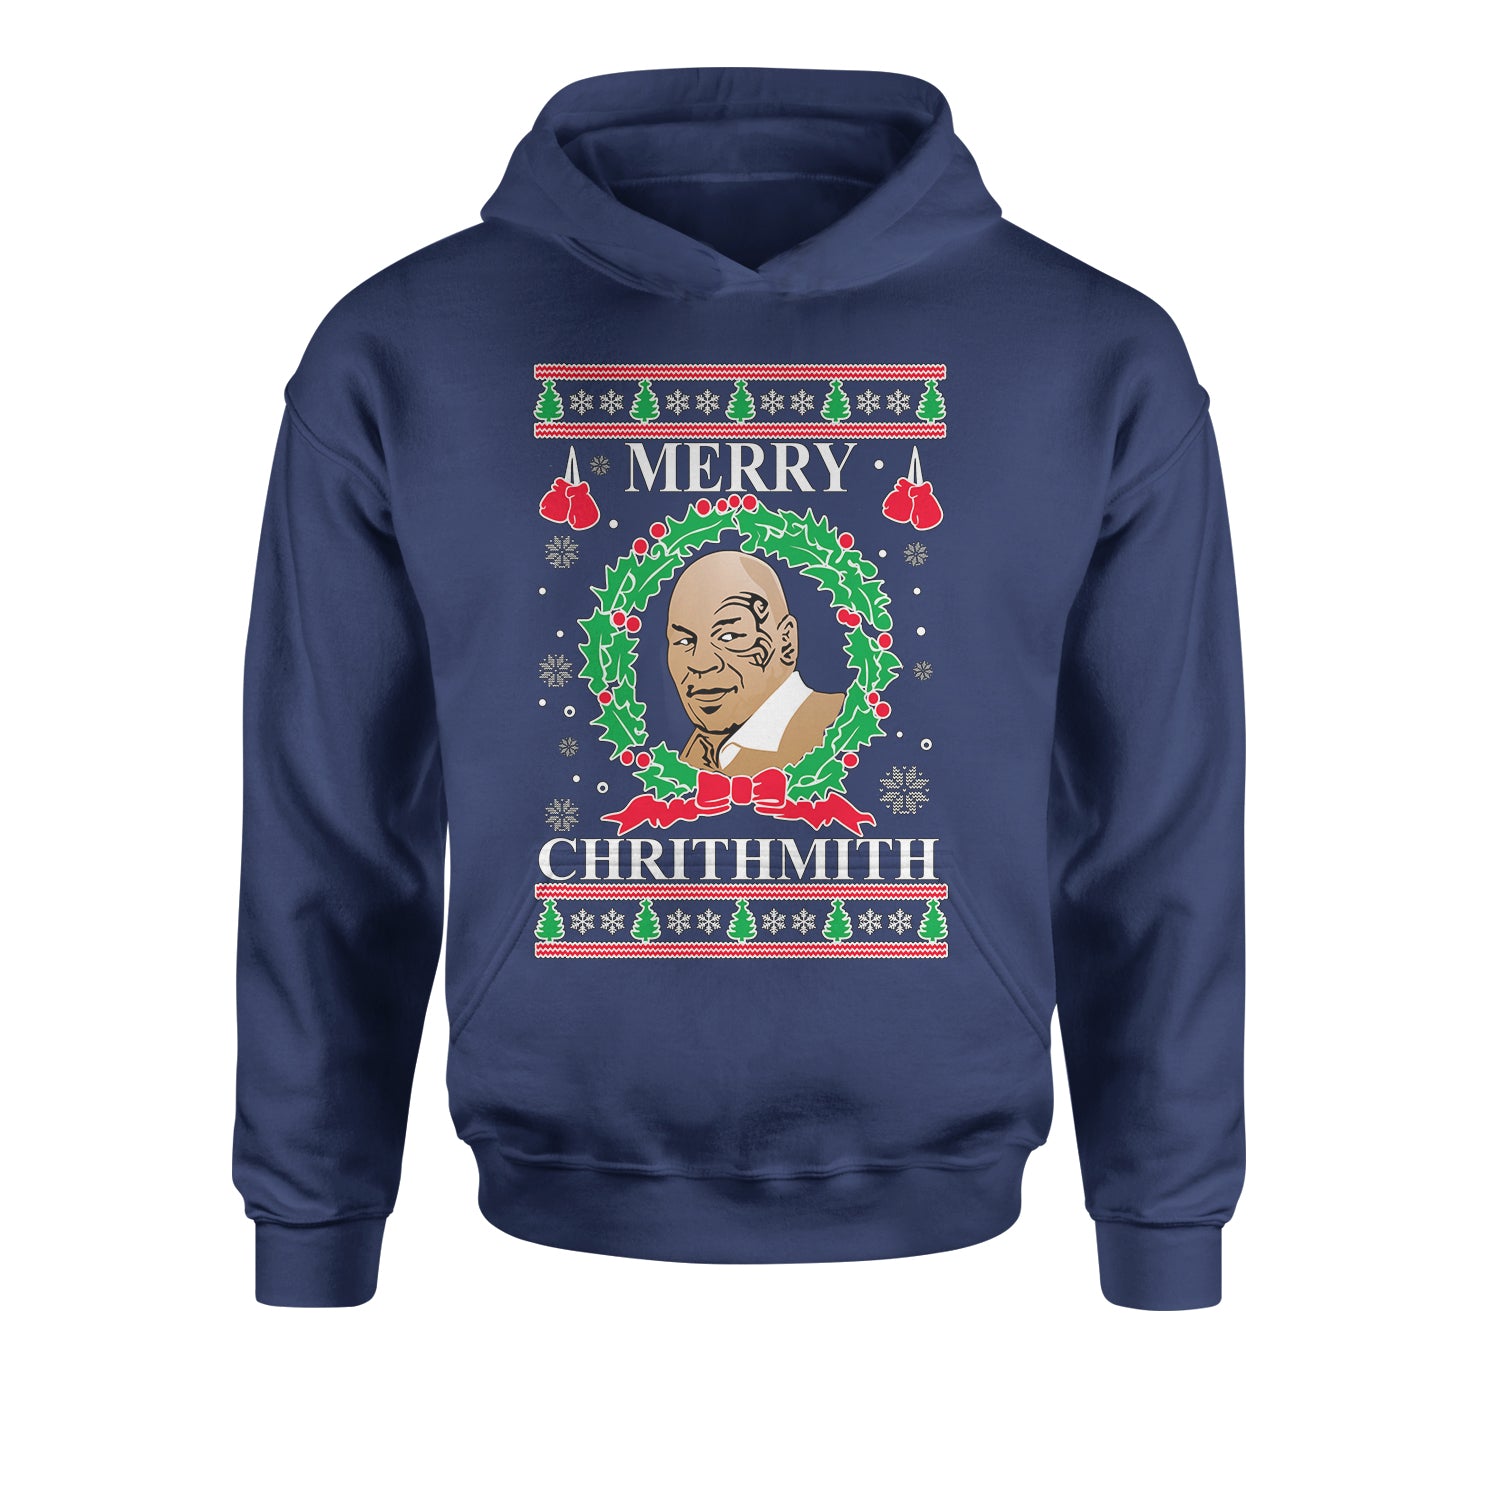 Merry Chrithmith Ugly Christmas Youth-Sized Hoodie christmas, holiday, michael, mike, sweater, tyson, ugly by Expression Tees